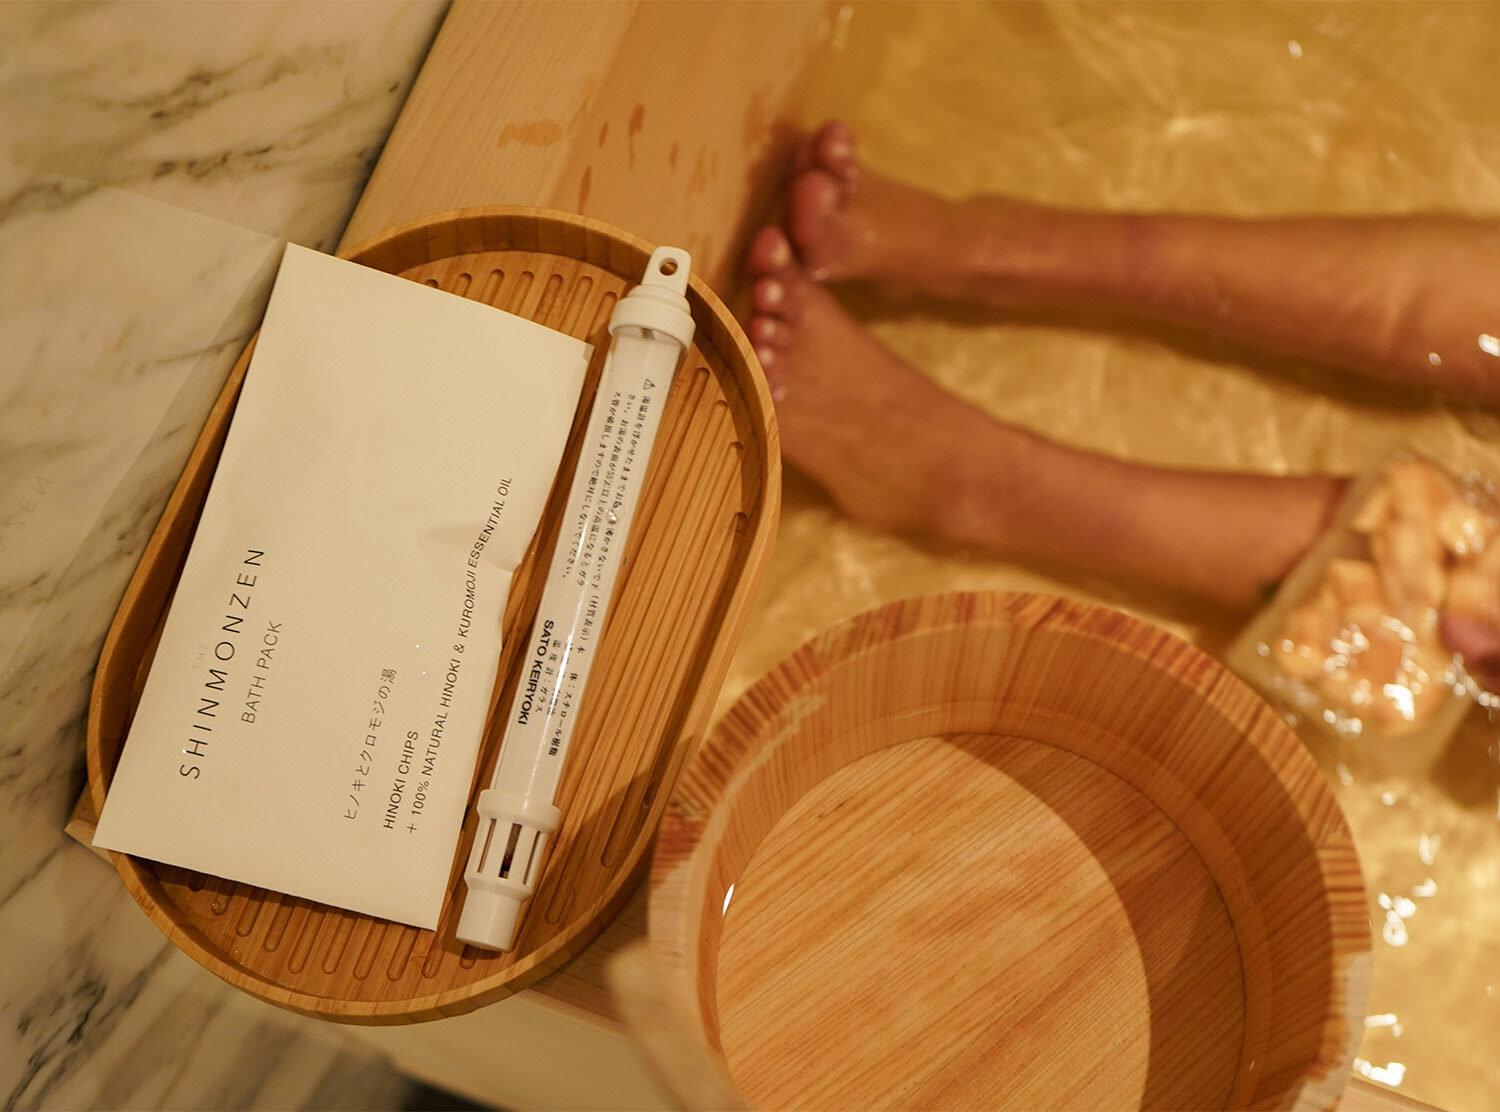 The Shinmonzen The hospitality went beyond our imagination — the bath was set with hinoki wood chips and kuromoji essential oil